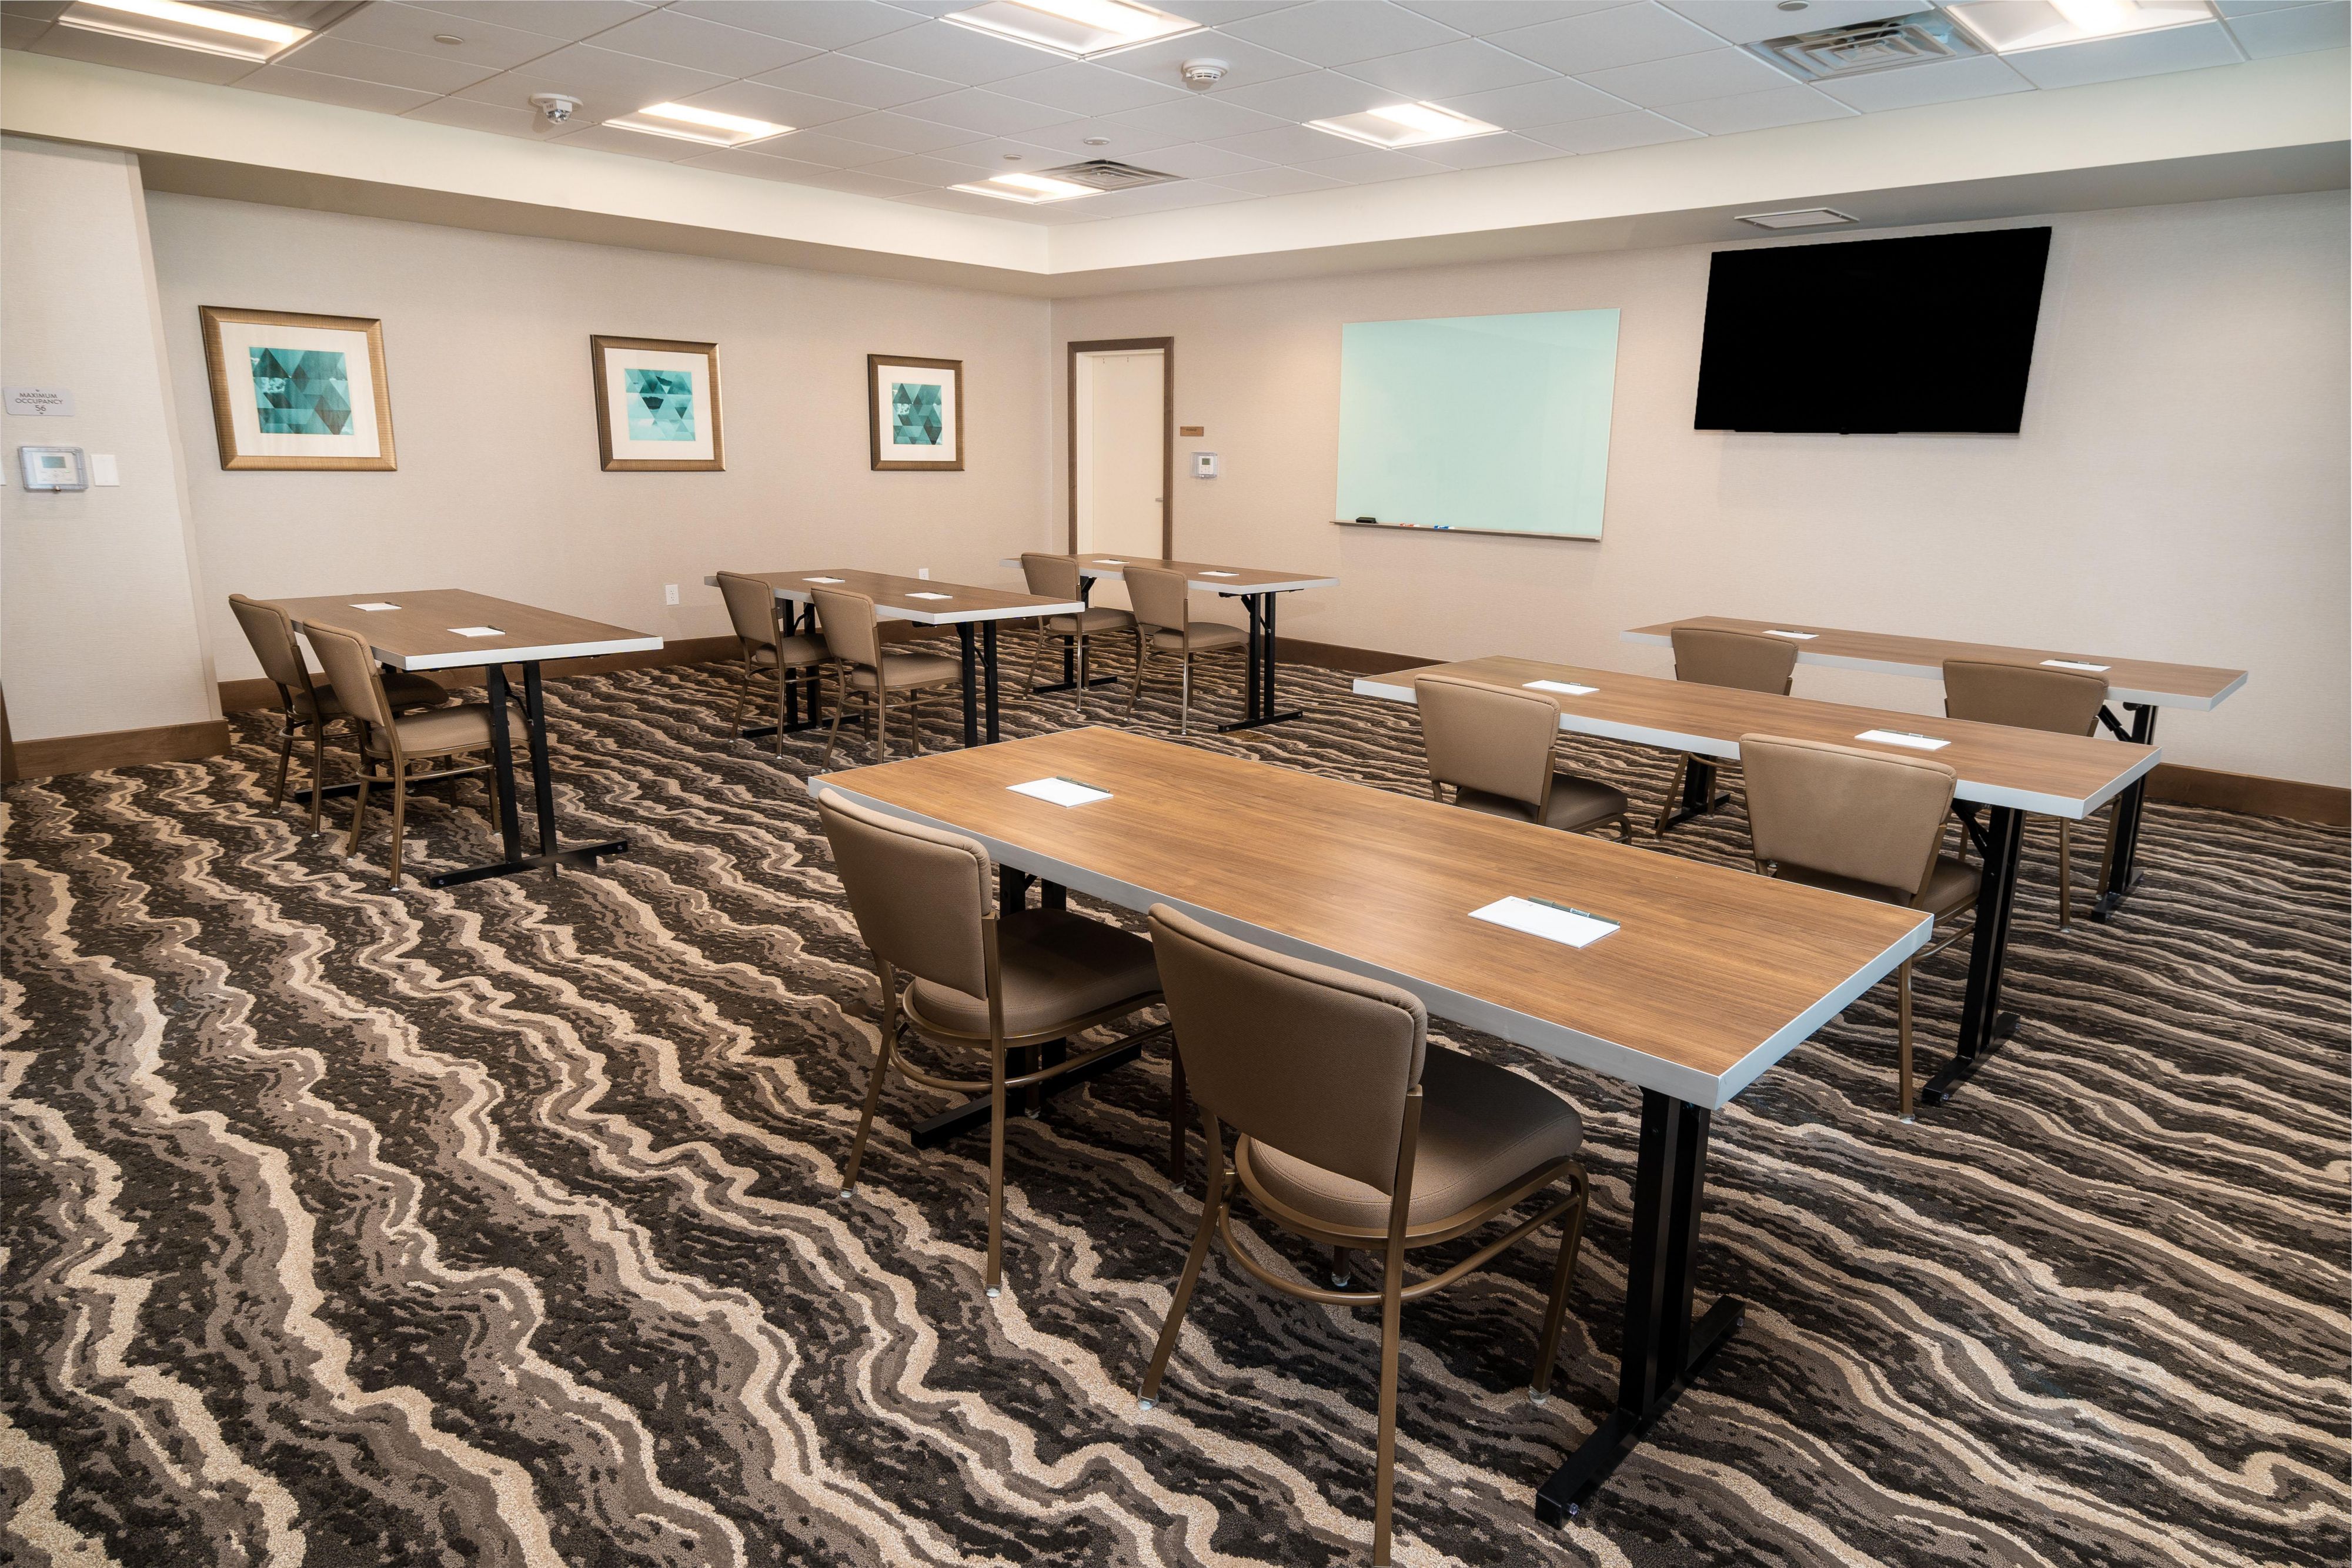 With over 600 square feet of flexible, stylish meeting space, we can host any kind of board meeting, social function, seminar or training with personalized attention. Please contact us to discuss our variety of catering and audio-visual options.  We would love to help make your next meeting or an event in the Largo area a success!
